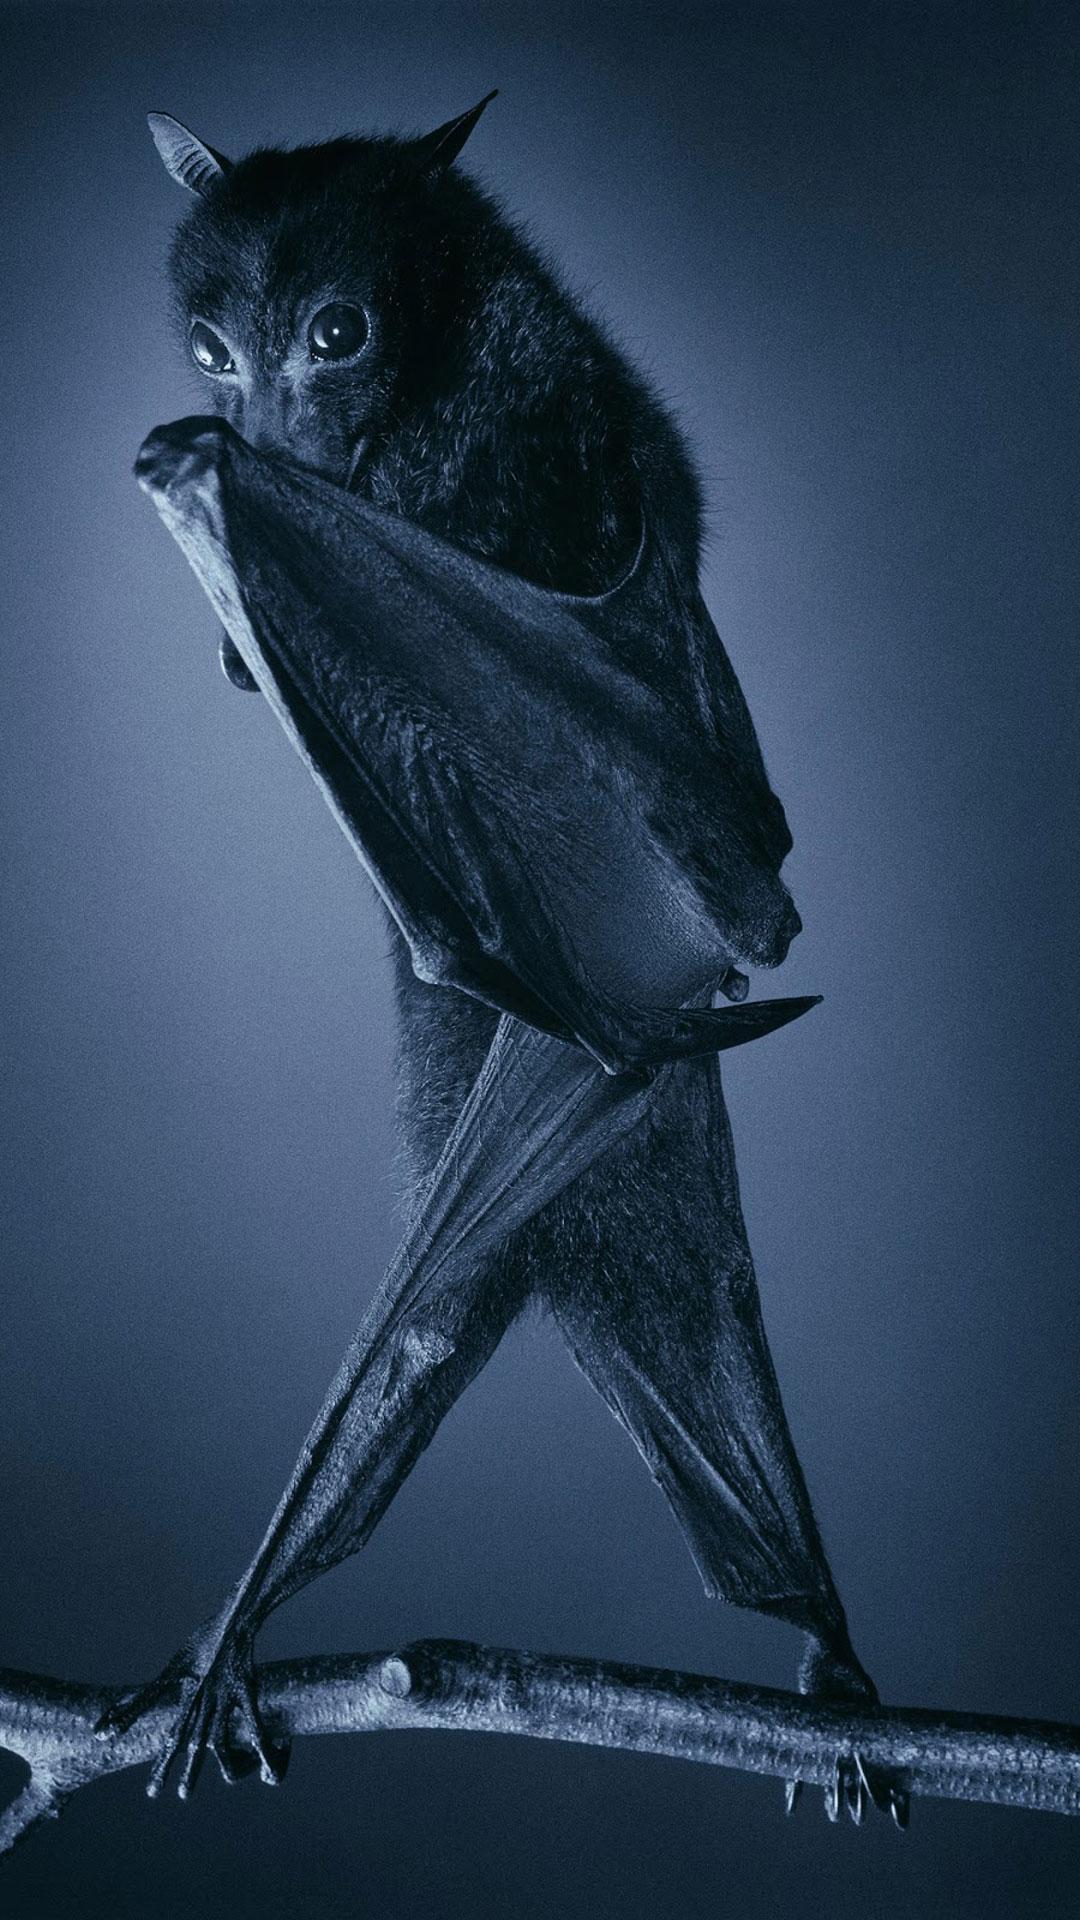 Bat Live Wallpaper for Android